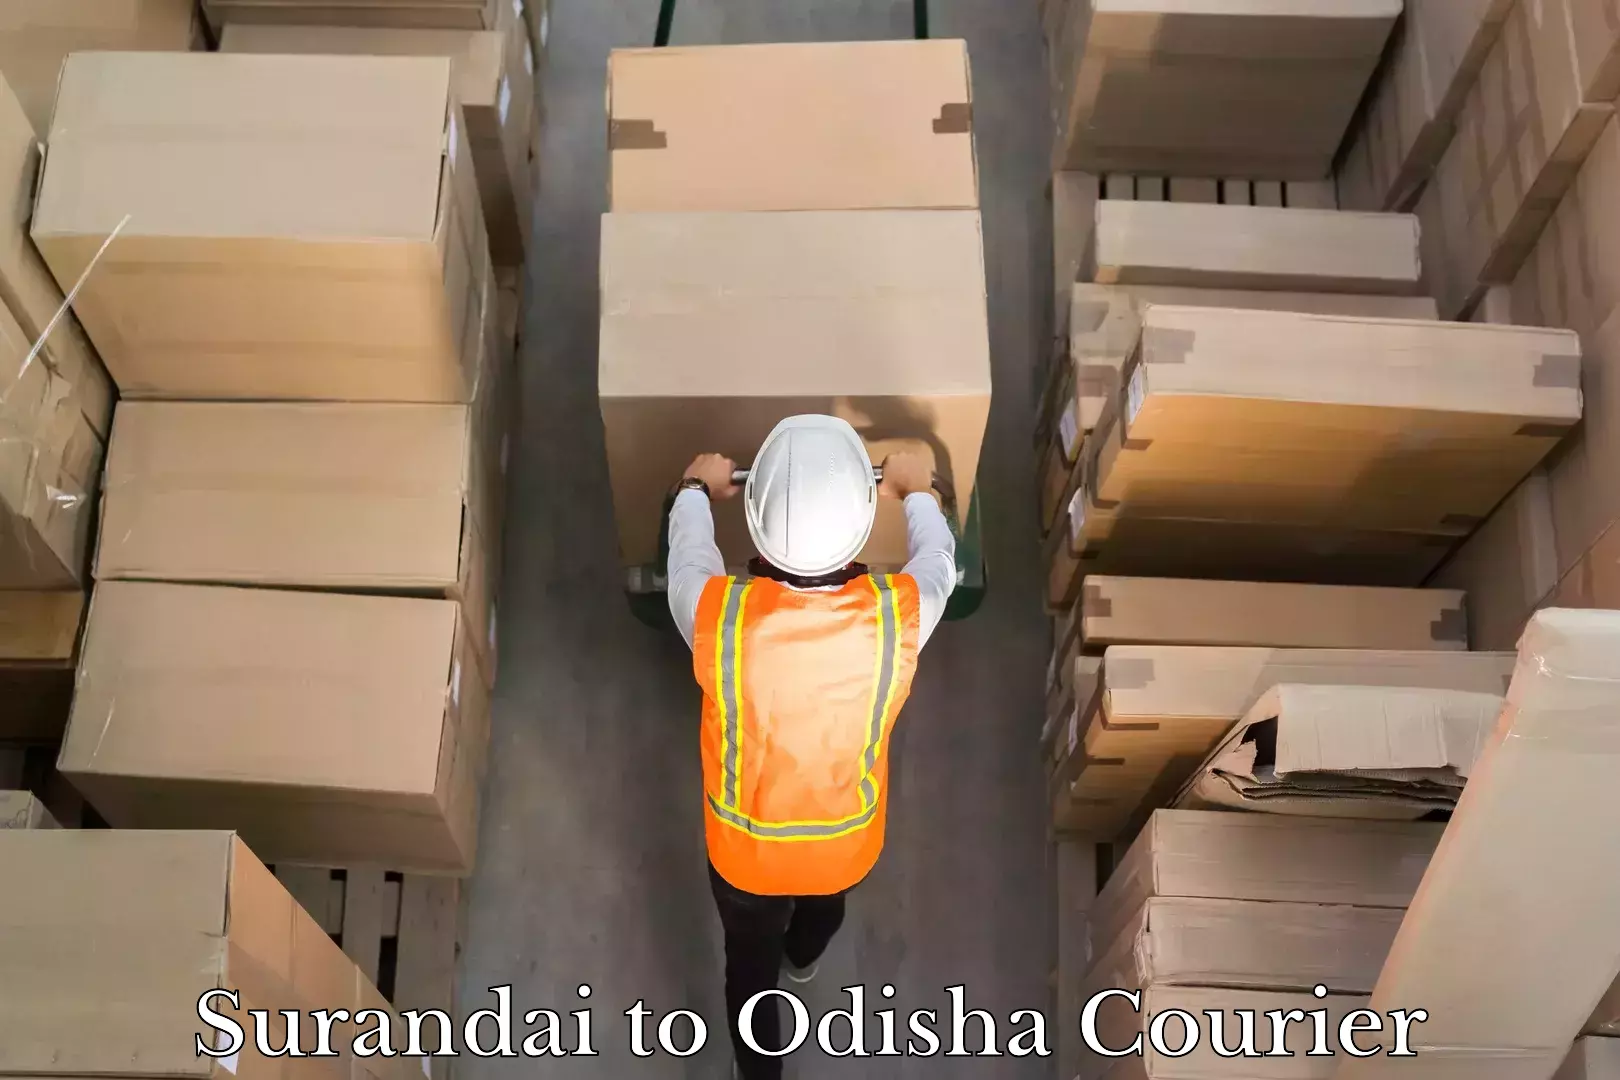 Package delivery network Surandai to Odisha